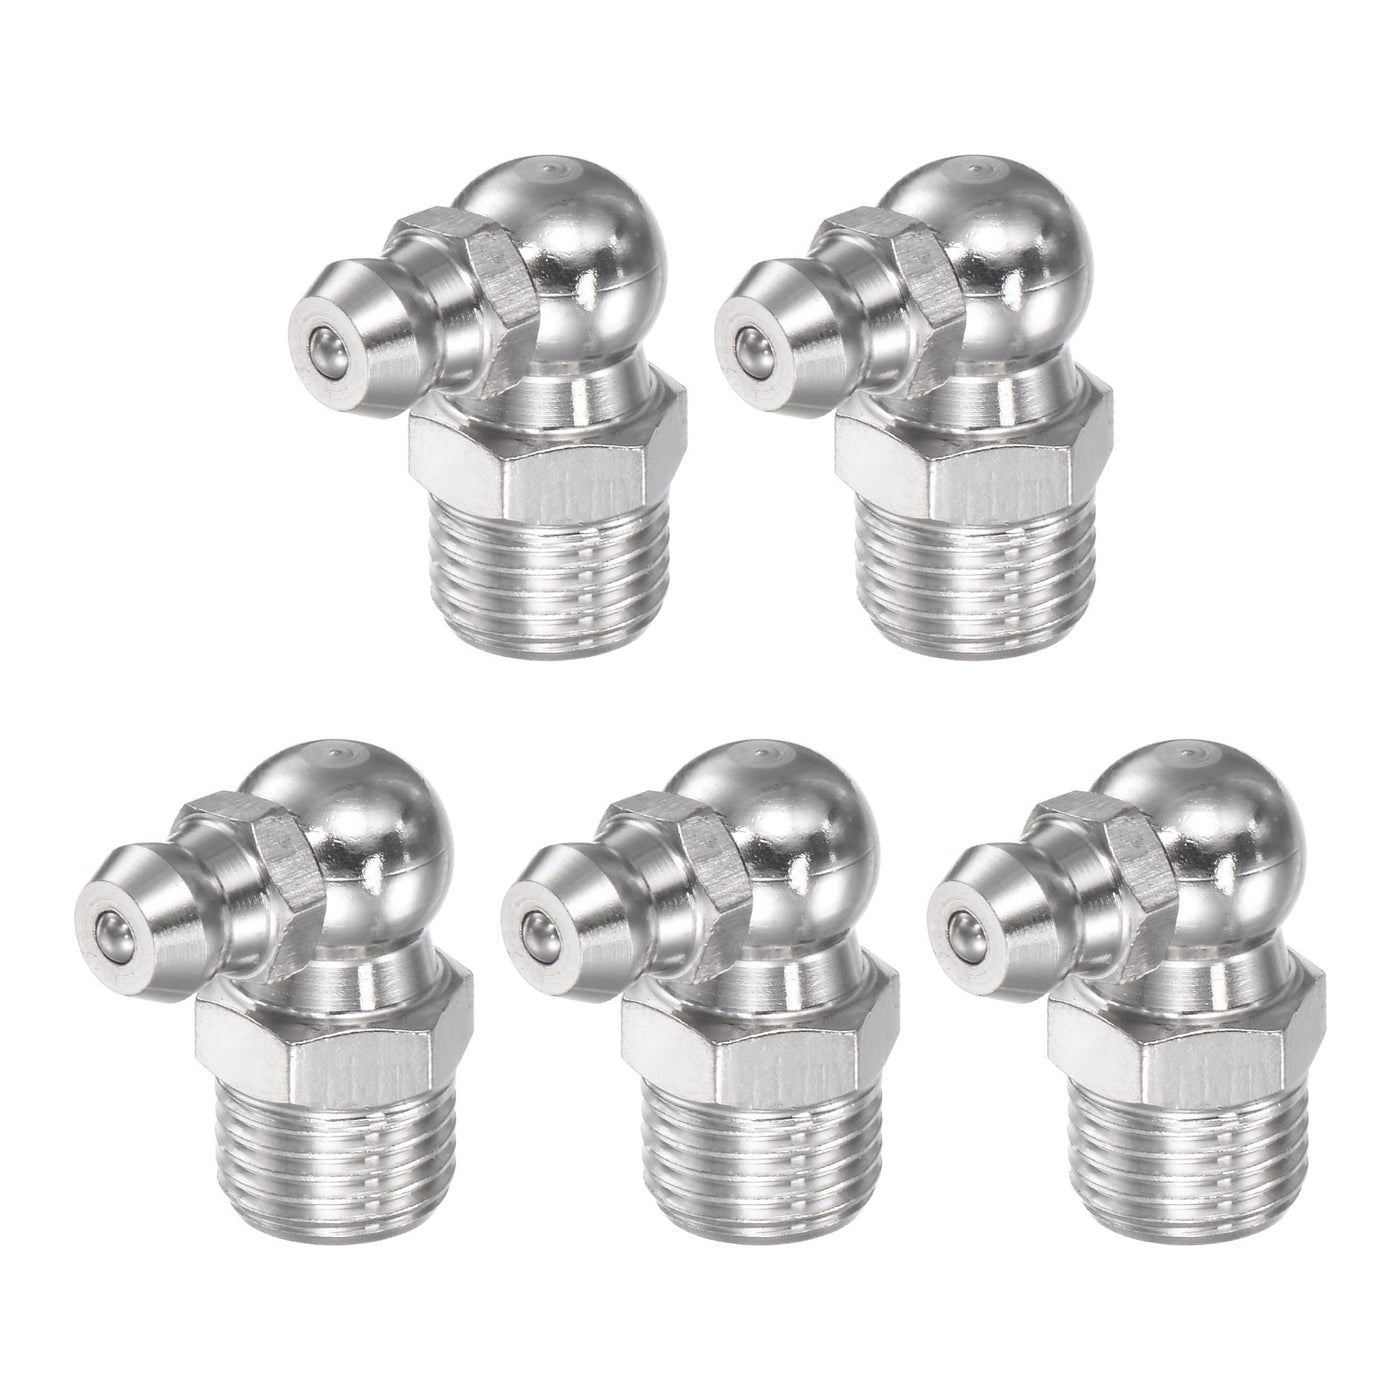 Uxcell Uxcell 304 Stainless Steel 90 Degree Hydraulic Grease Fitting M10 x 1mm Thread, 5Pcs